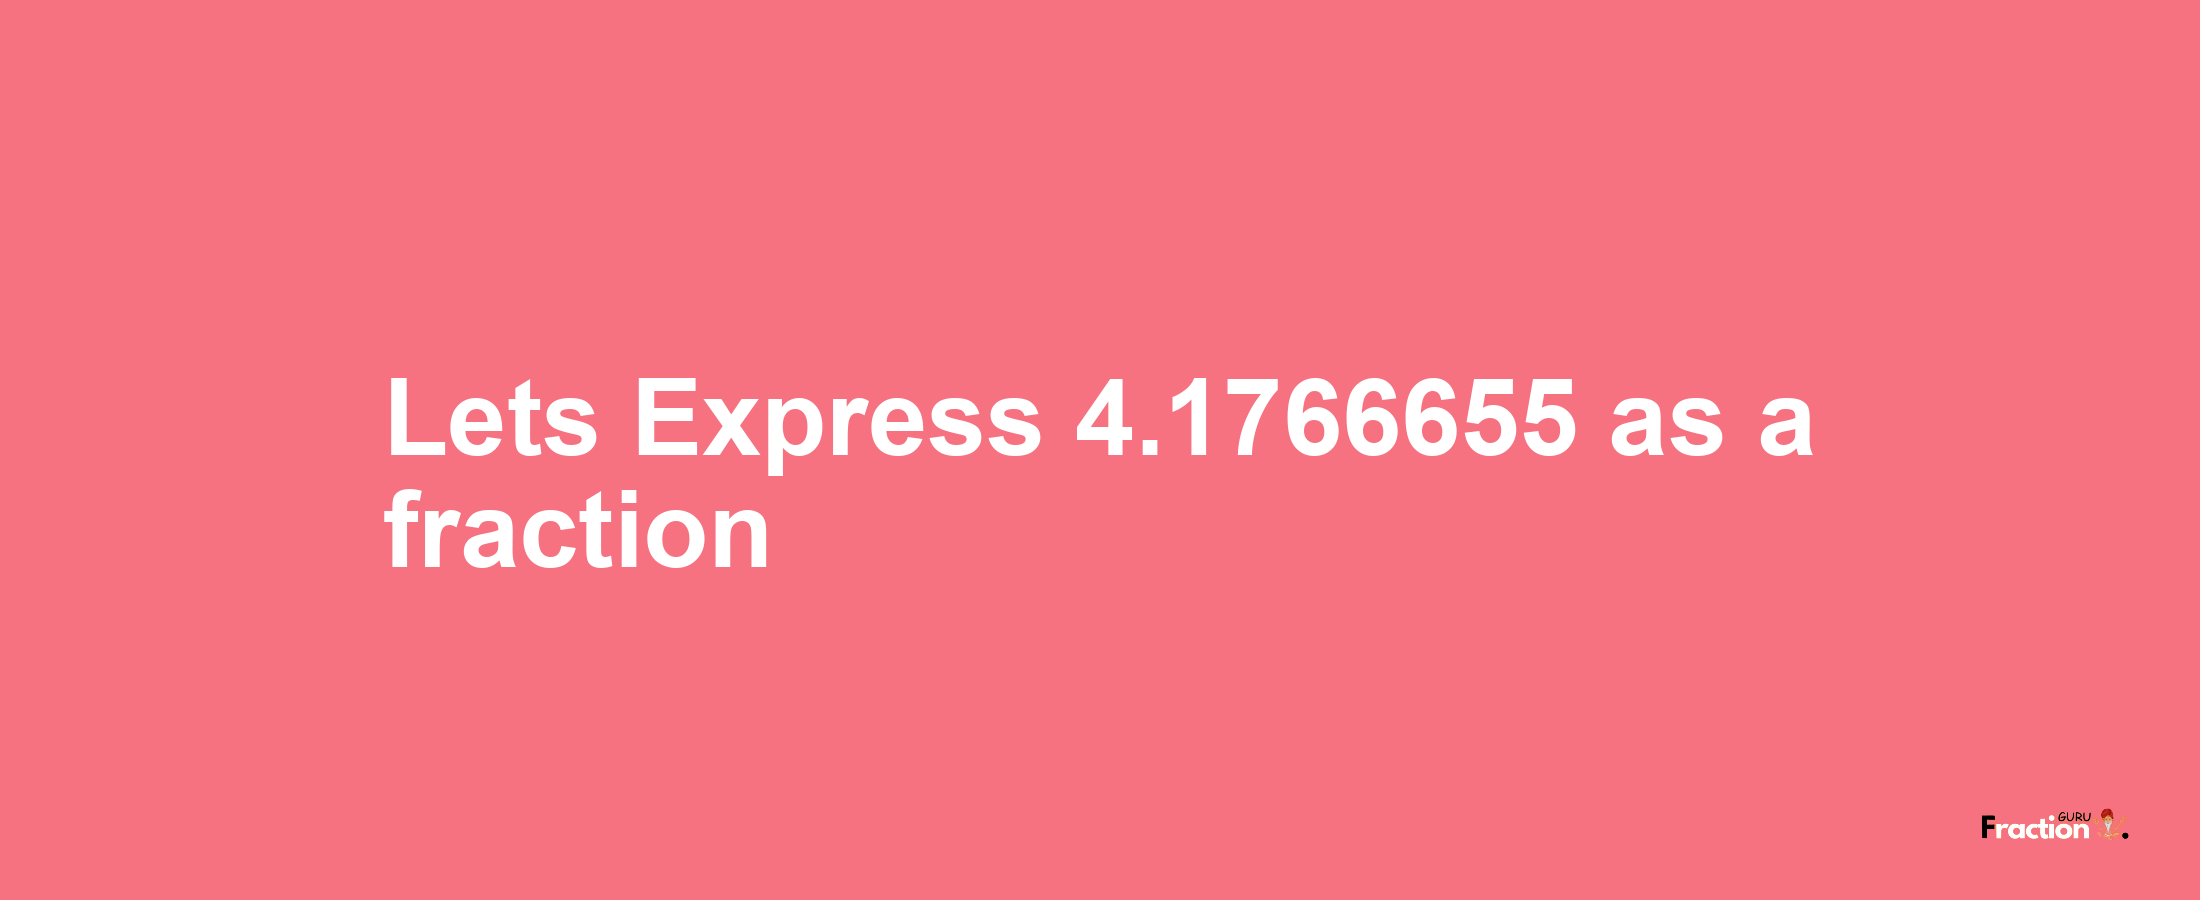 Lets Express 4.1766655 as afraction